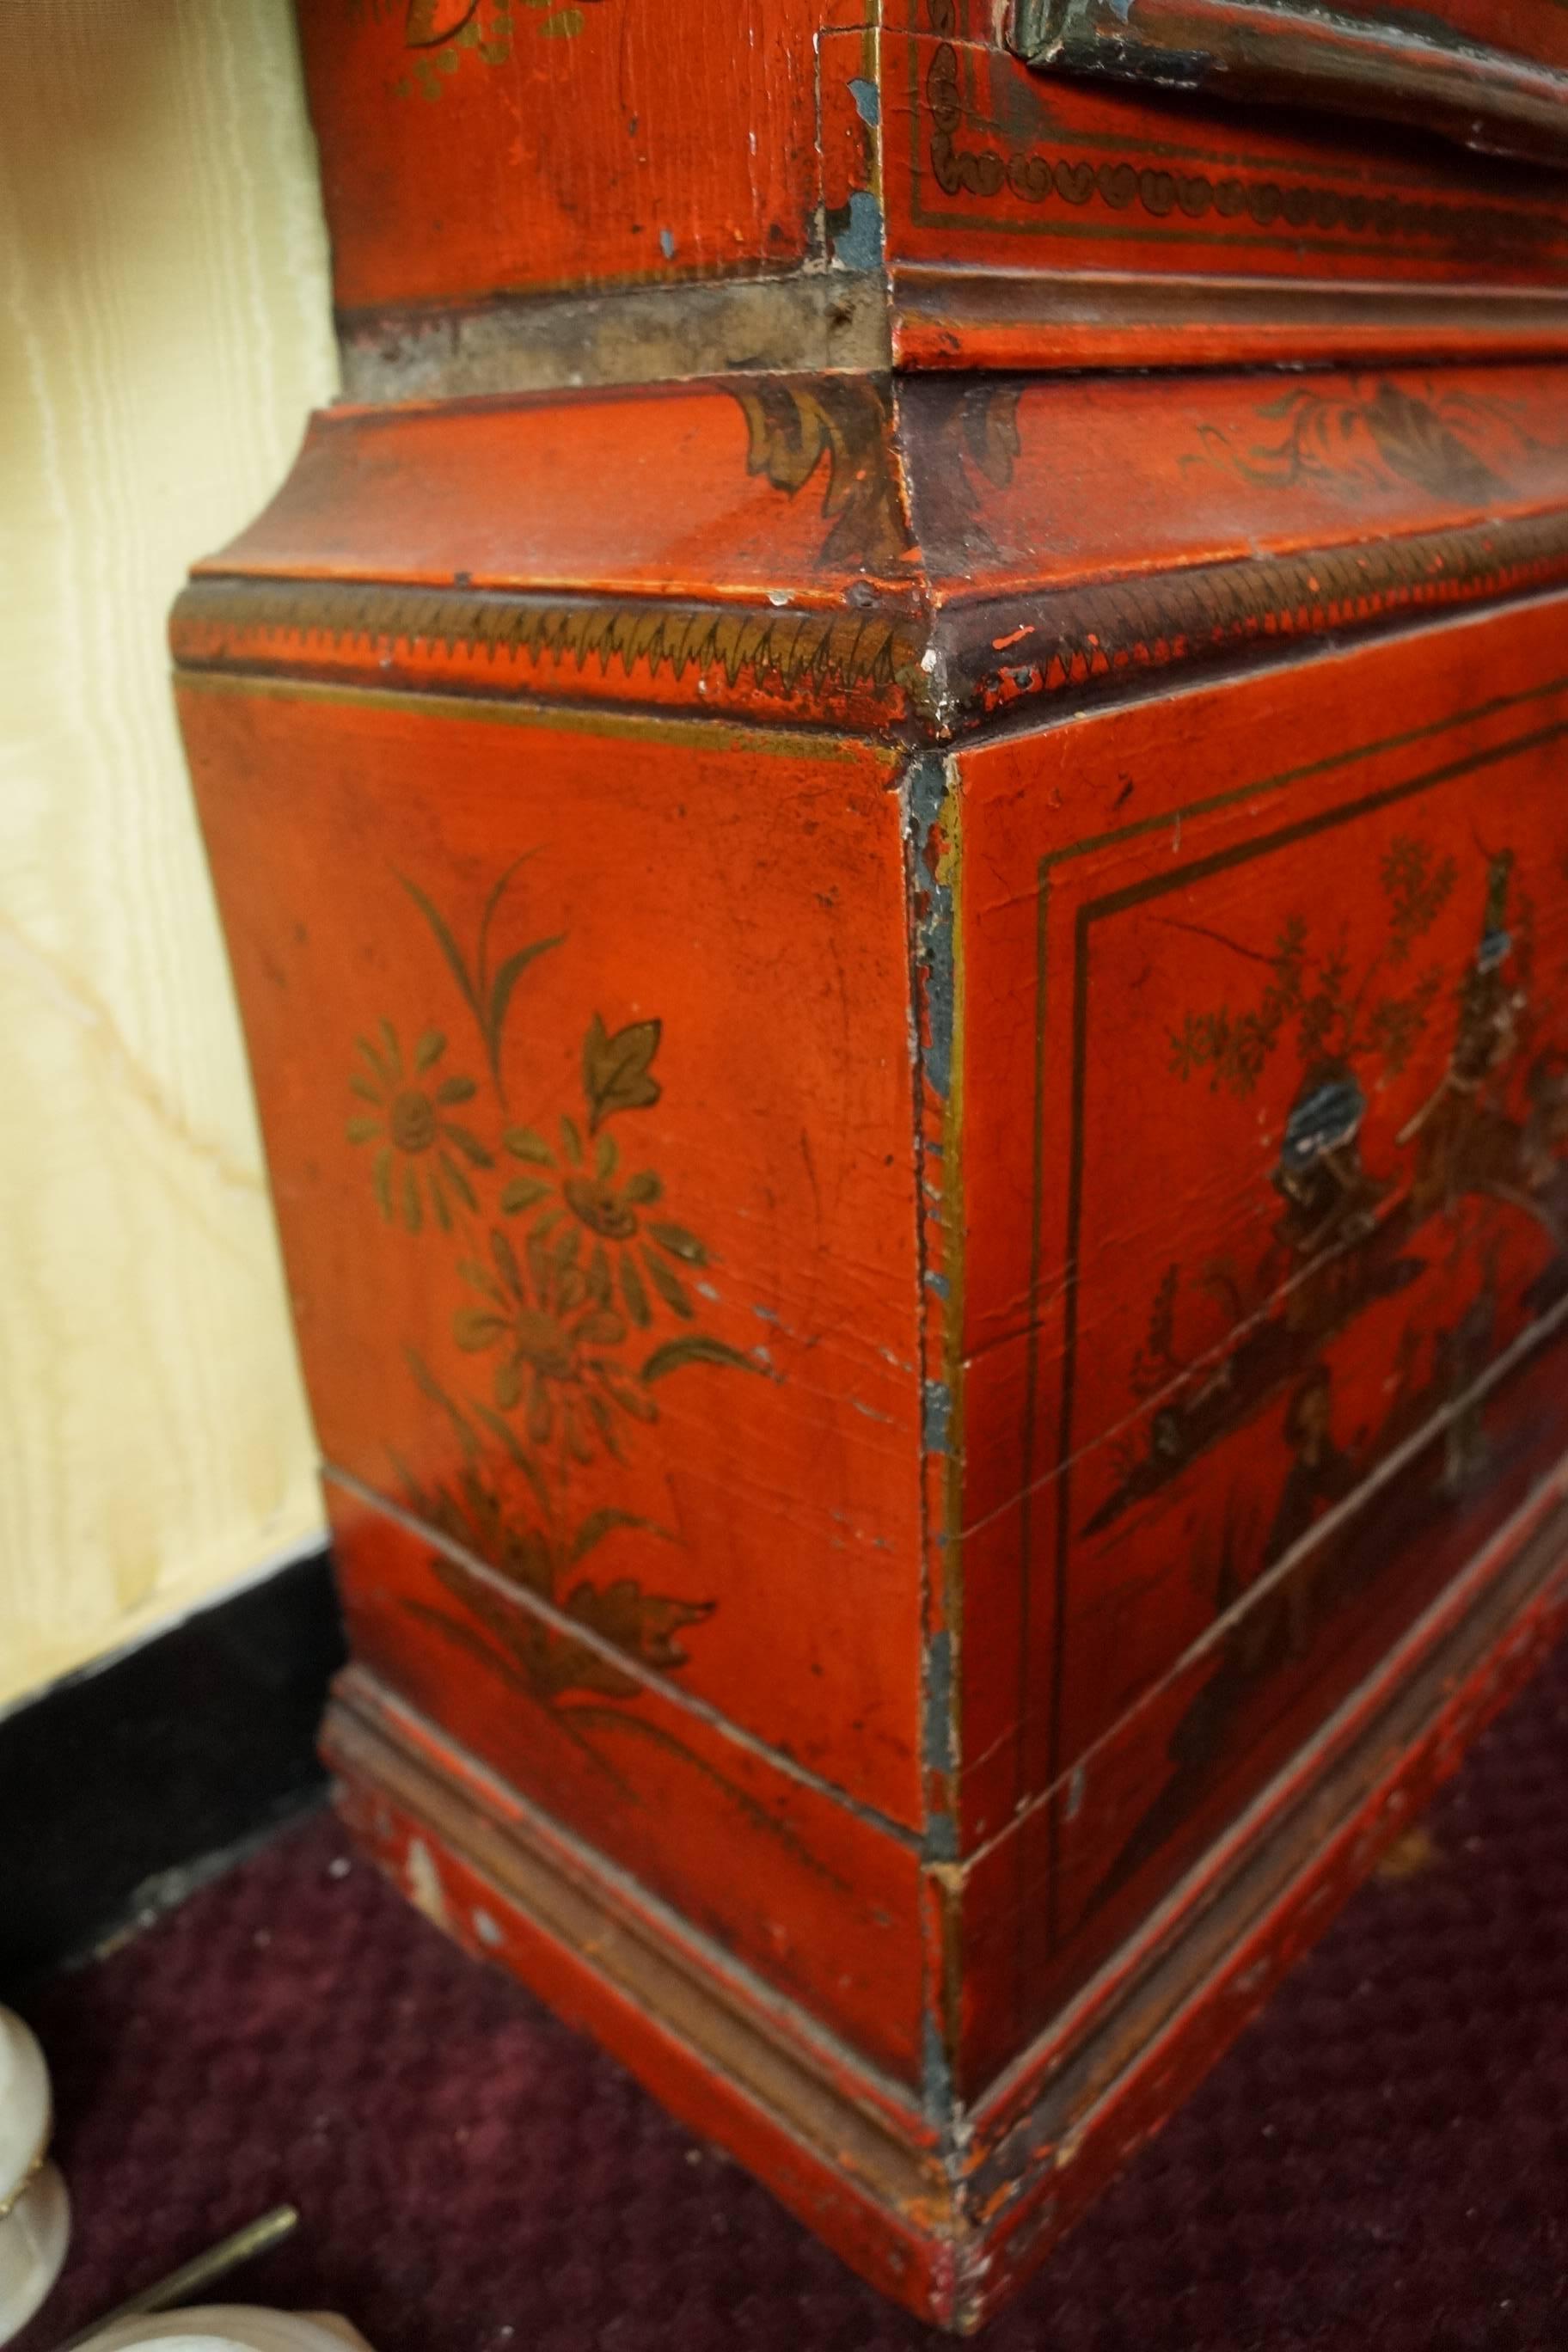 Tall chinoiserie red painted grandfather clock.
Stock number: CC55.